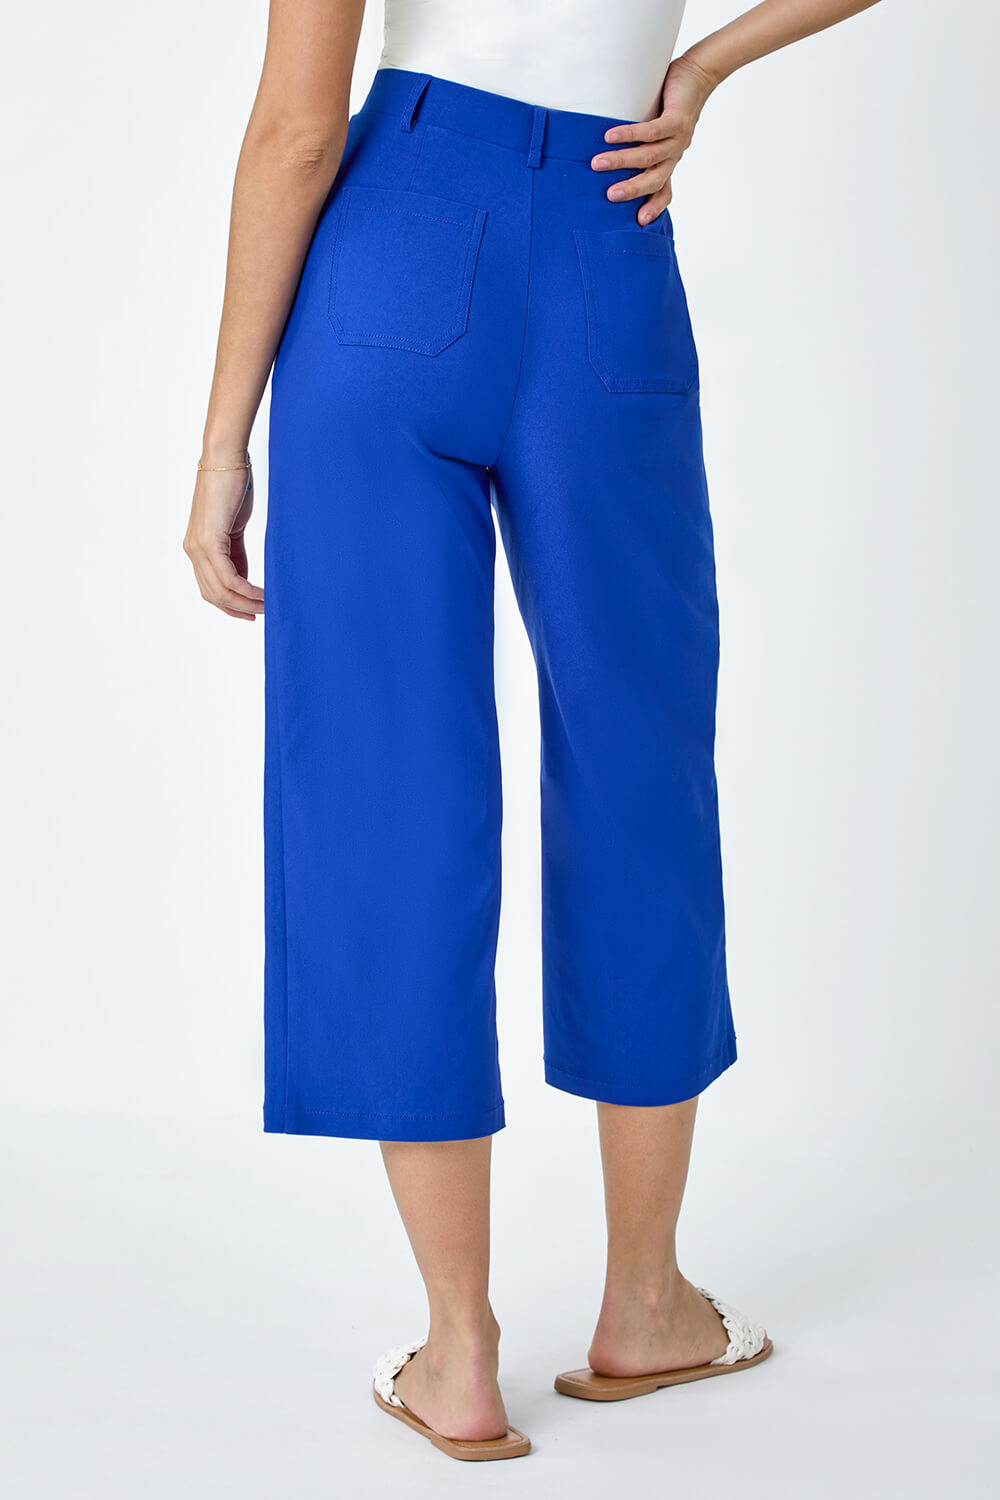 Royal Blue Cropped Stretch Culotte, Image 3 of 5